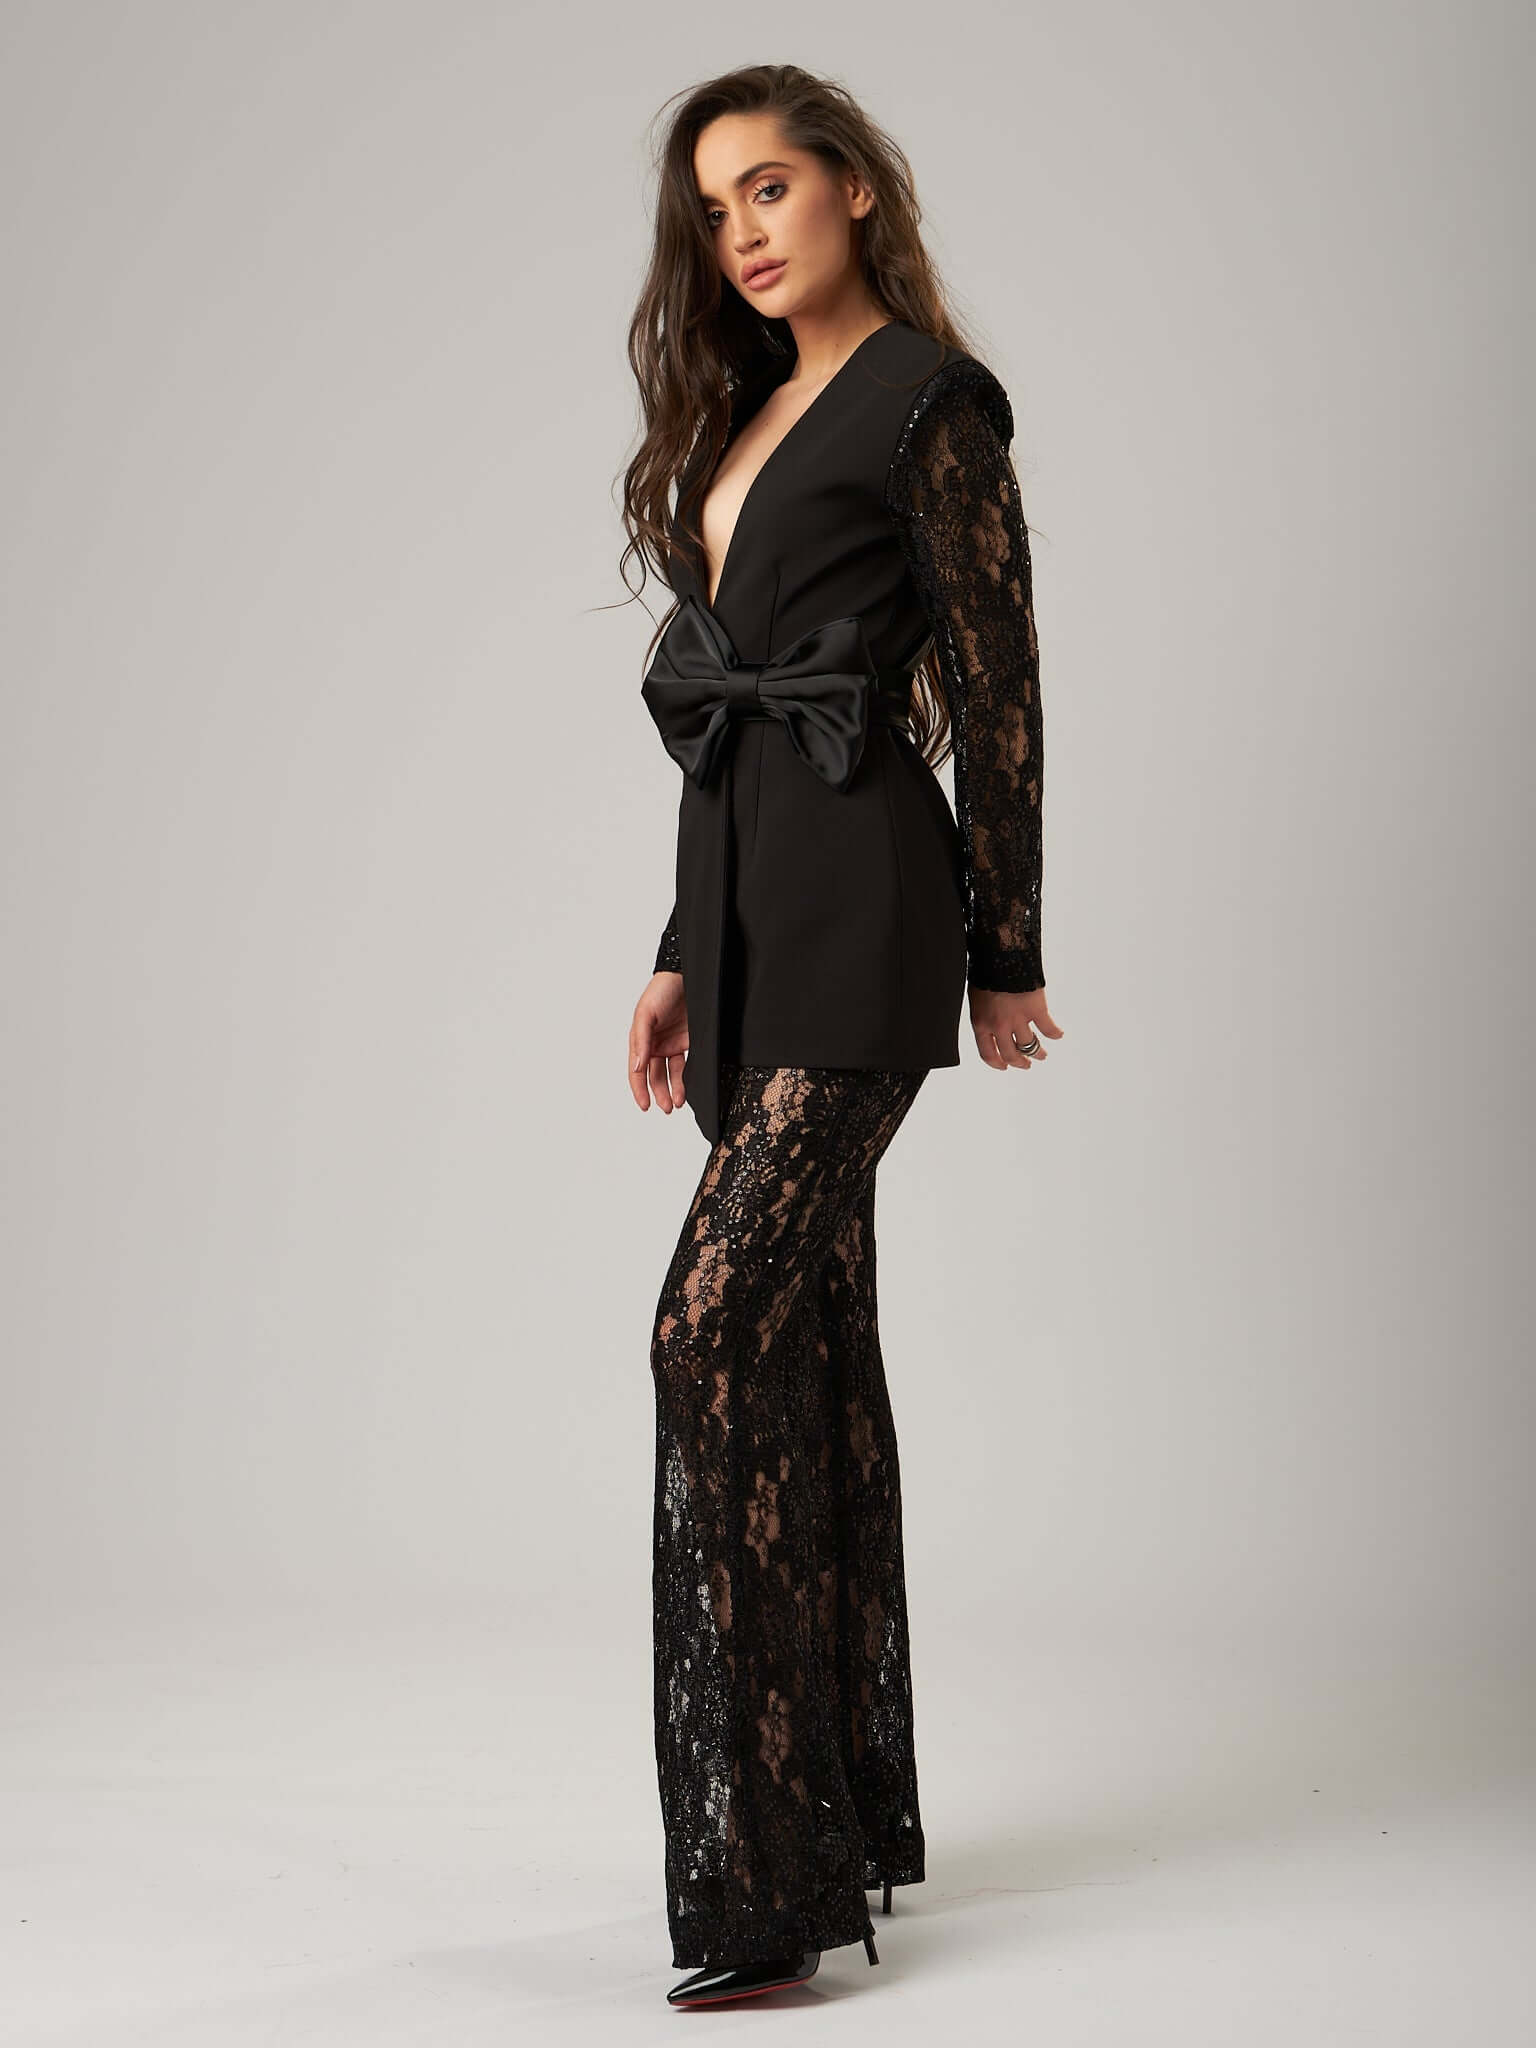 Black Lace Trousers by Twin-set – The Perfect Provenance